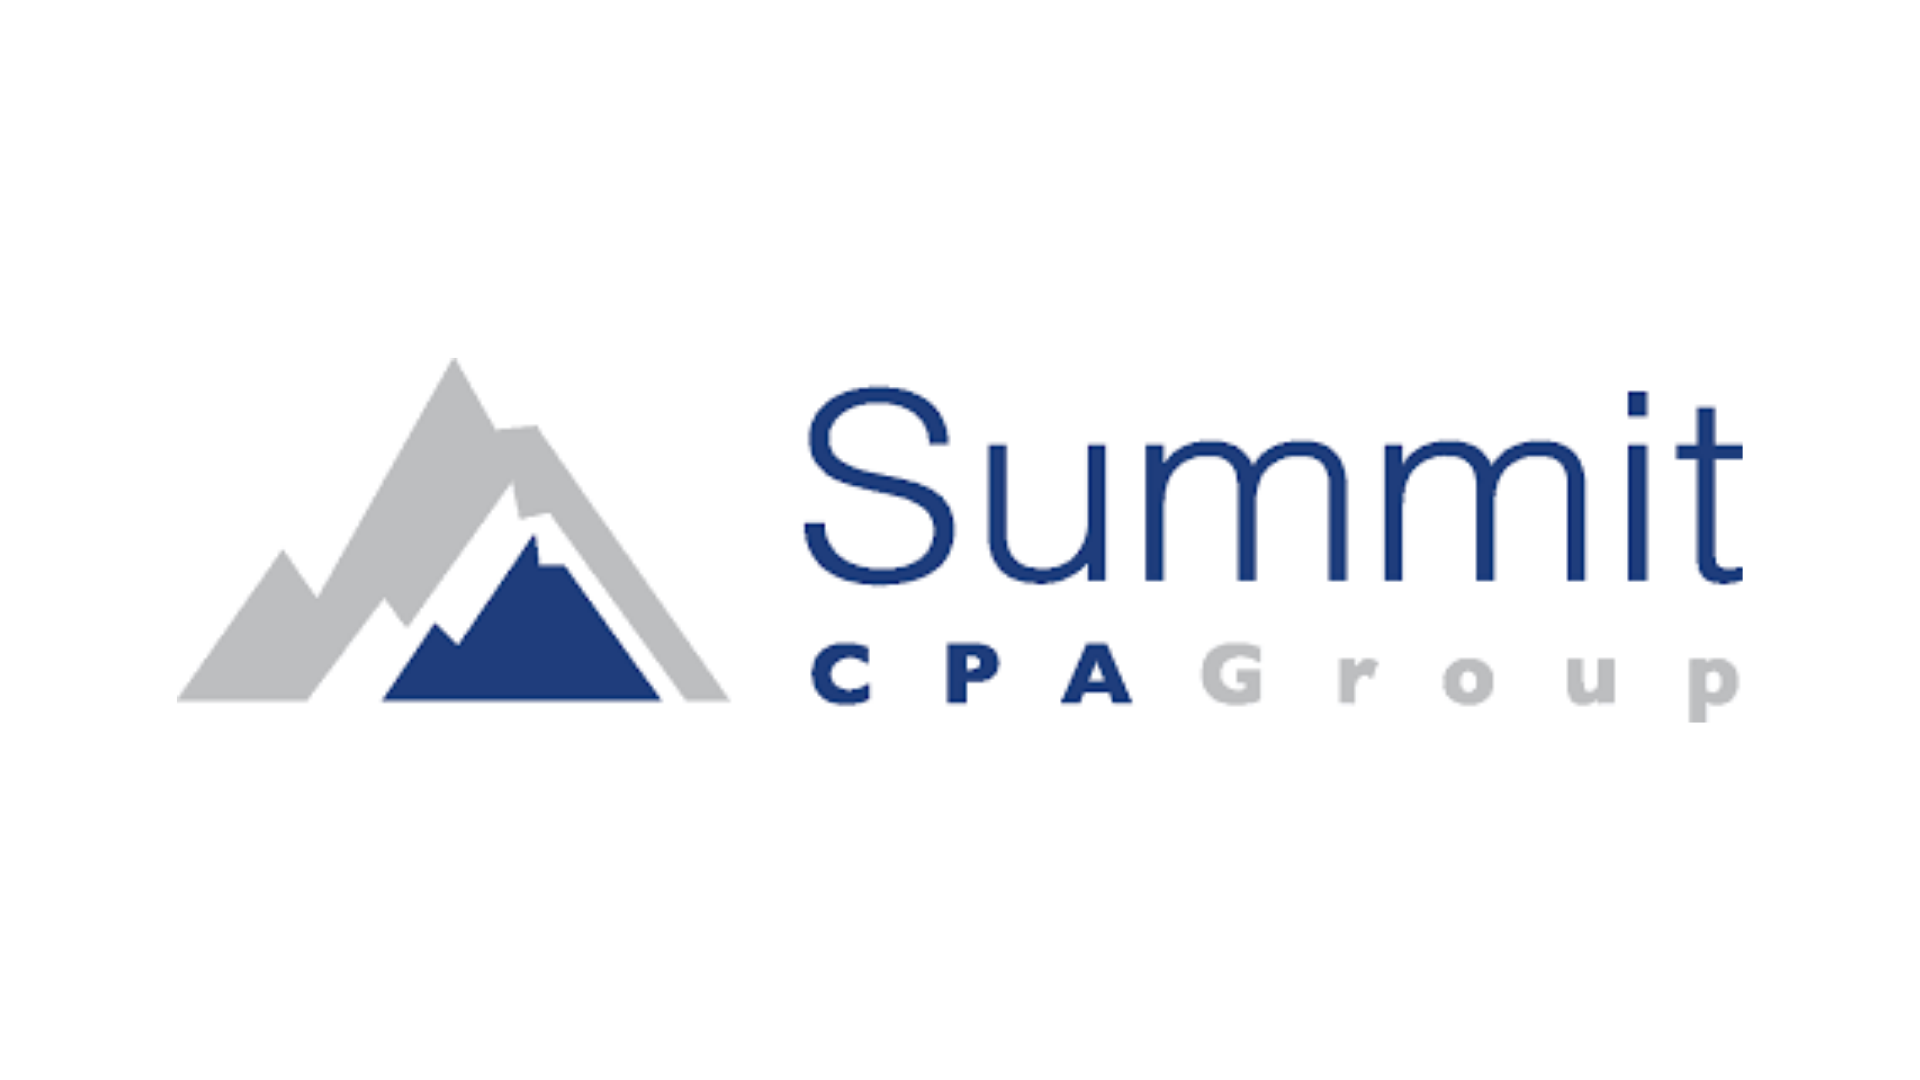 How Summit CPA is using Jirav’s forecasting capabilities to fuel growth